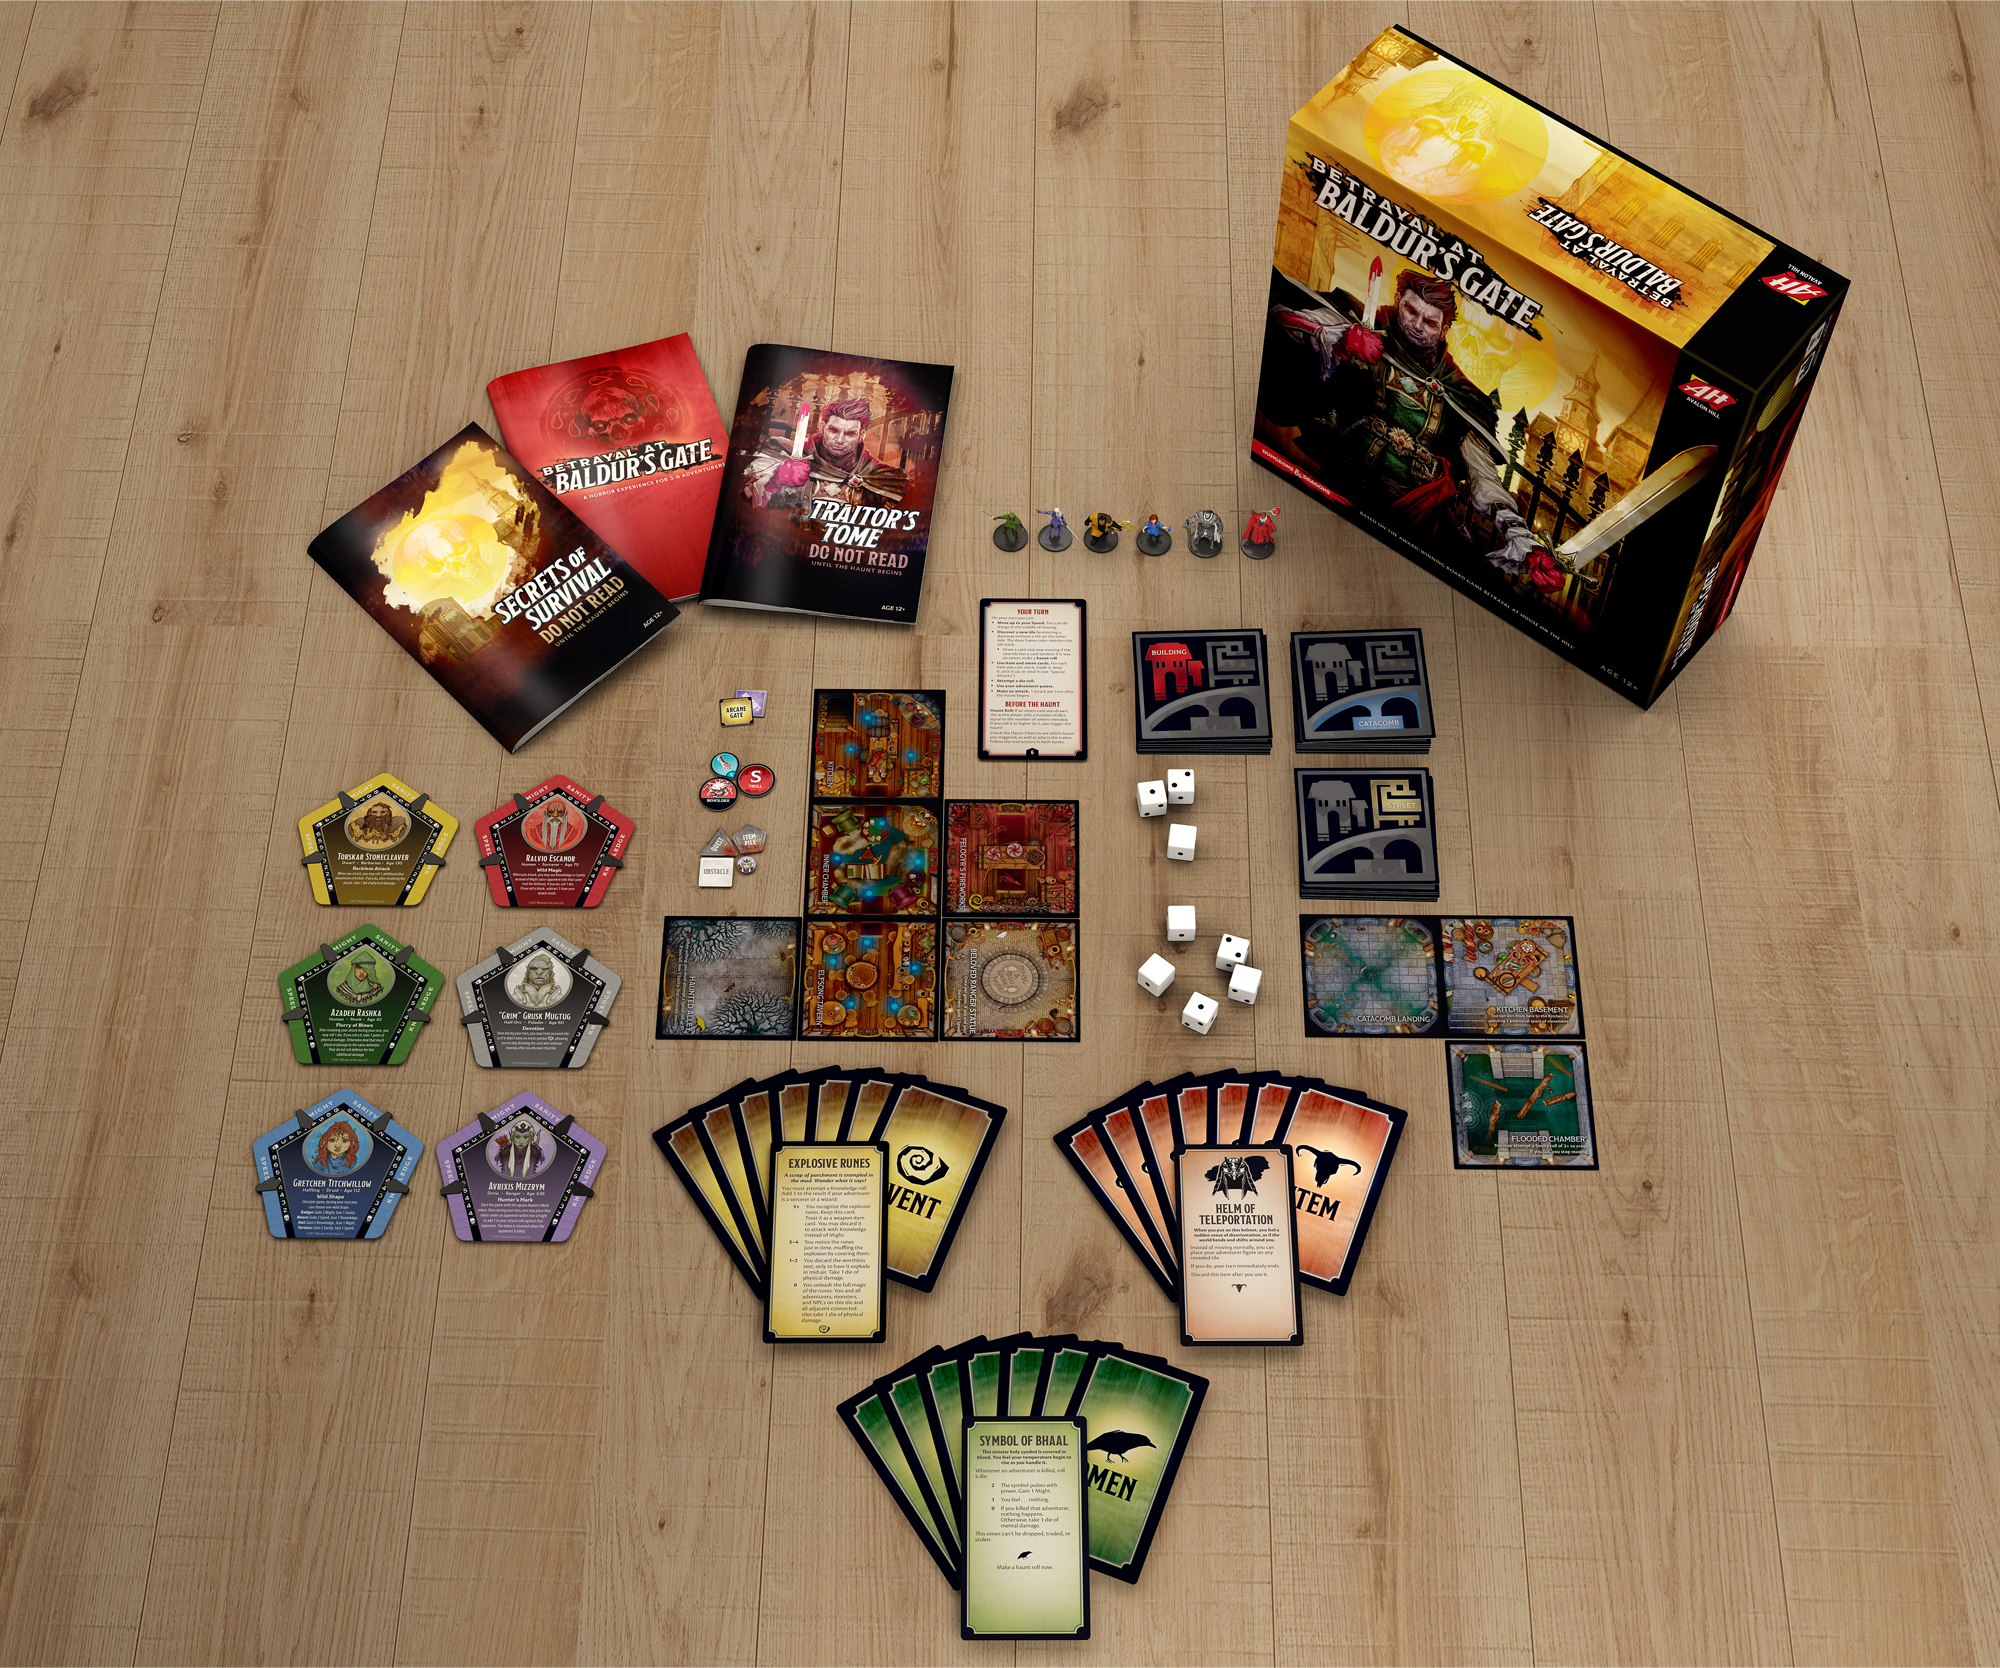 Classic Board Game Betrayal At House On The Hill Is Heading To The World Of Dungeons & Dragons